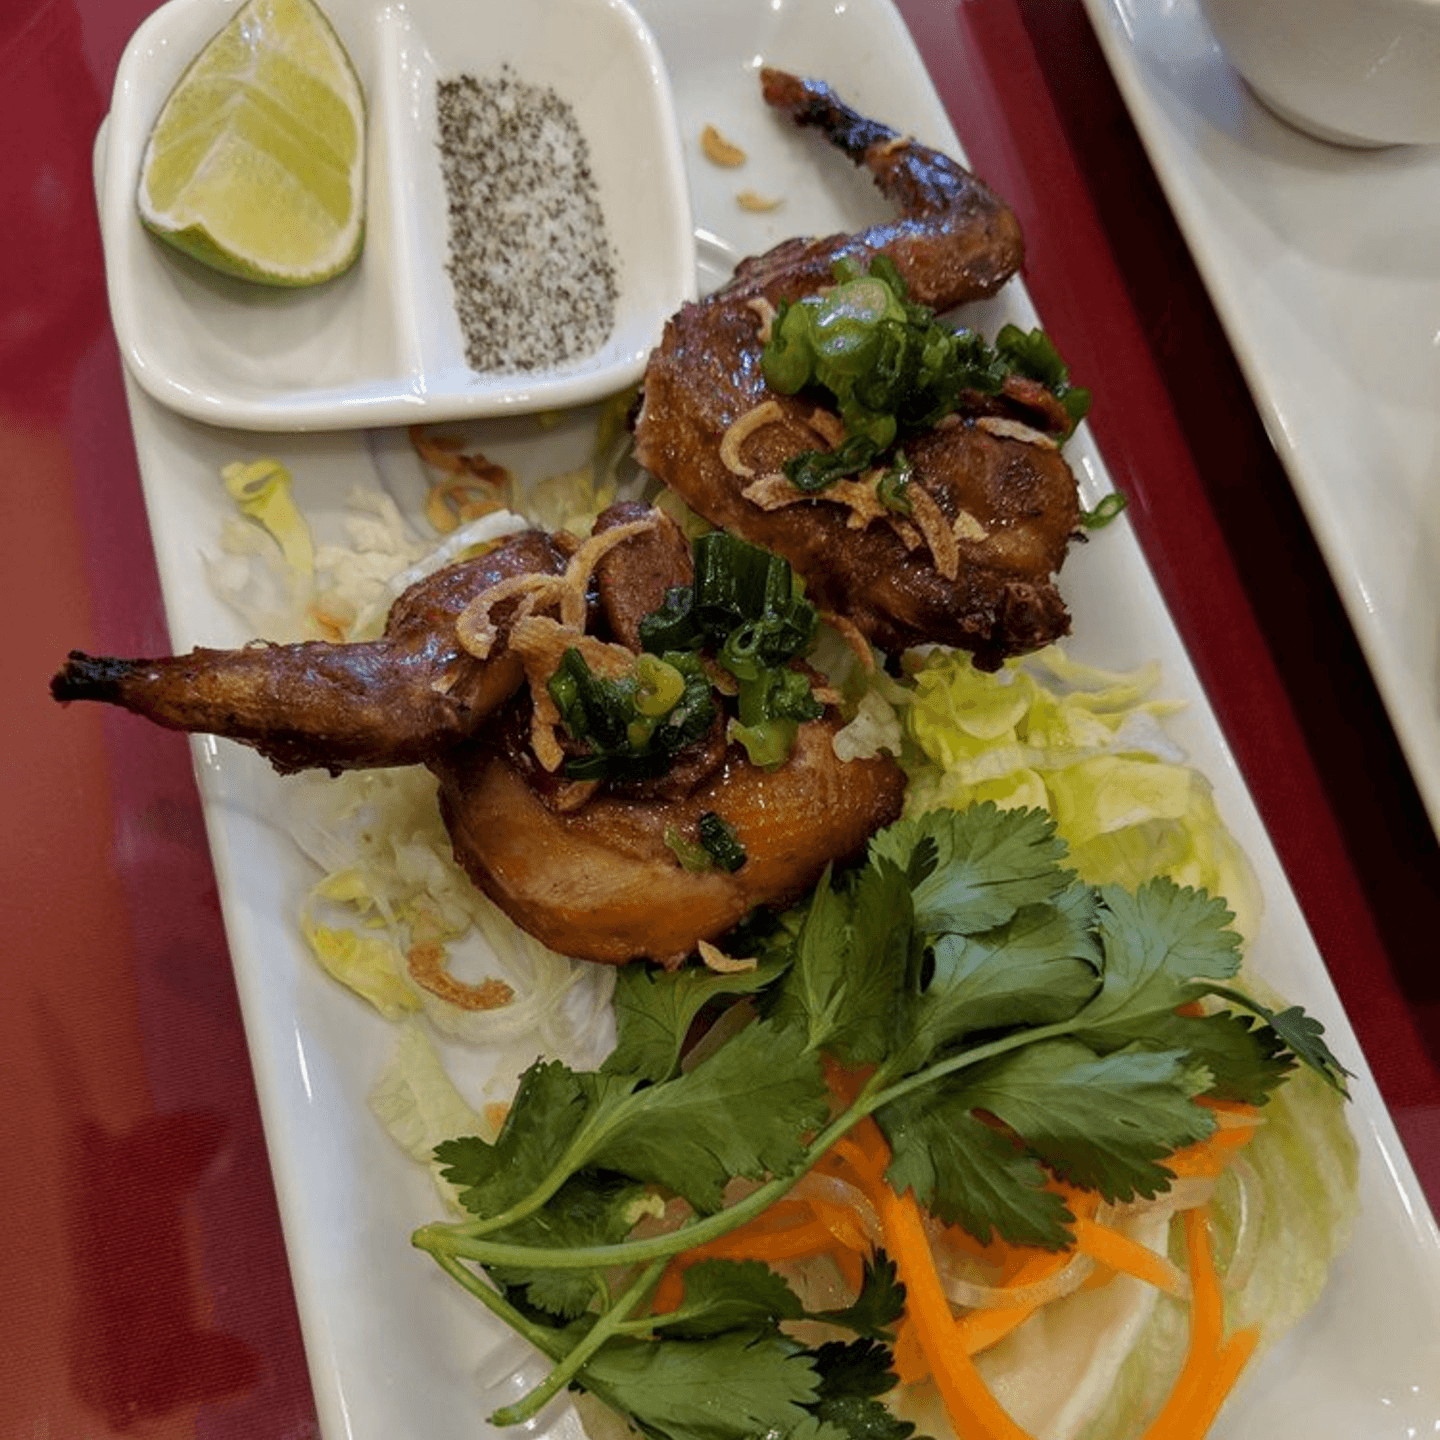 Our Roast Quail with Pepper Salt and Lime